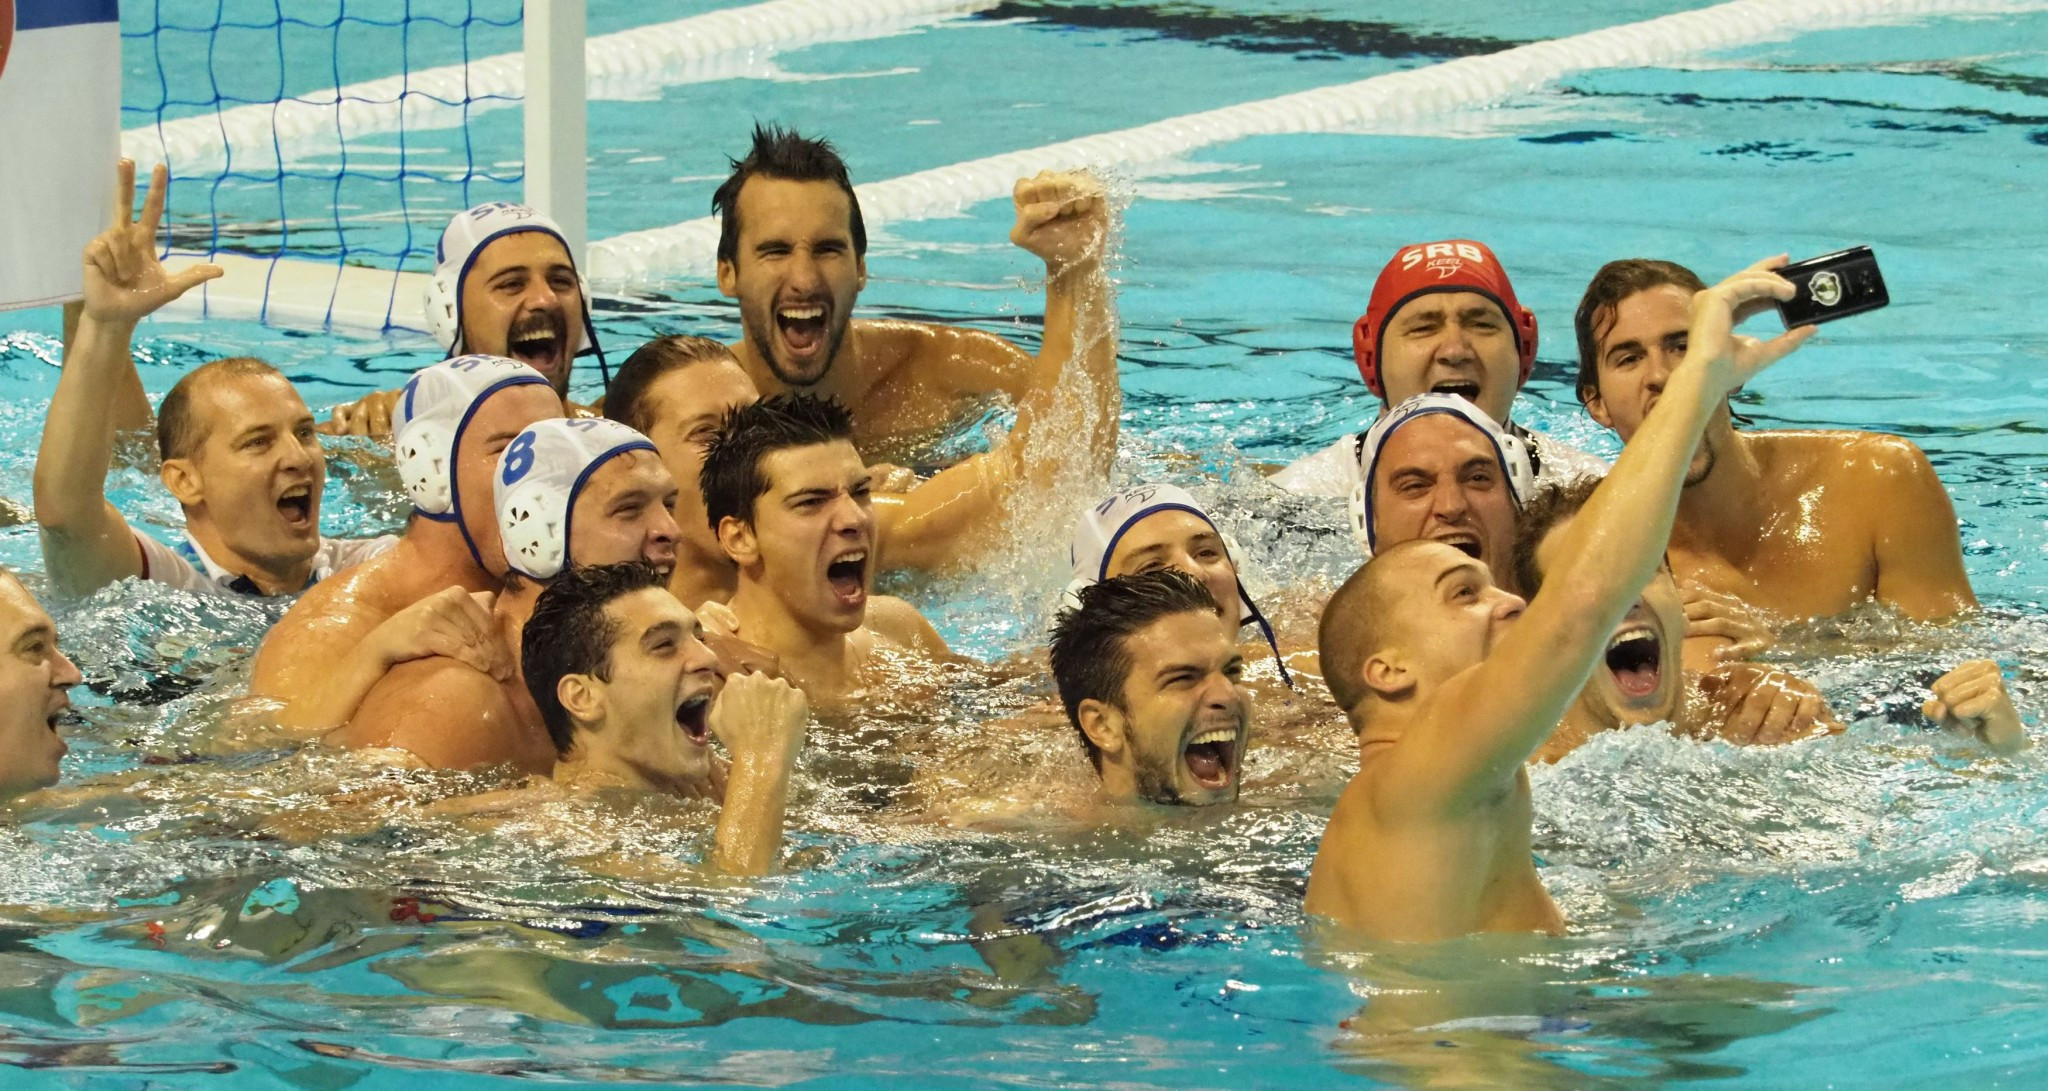 Serbia claimed the men's water polo title by beating Russia ©Taipei 2017